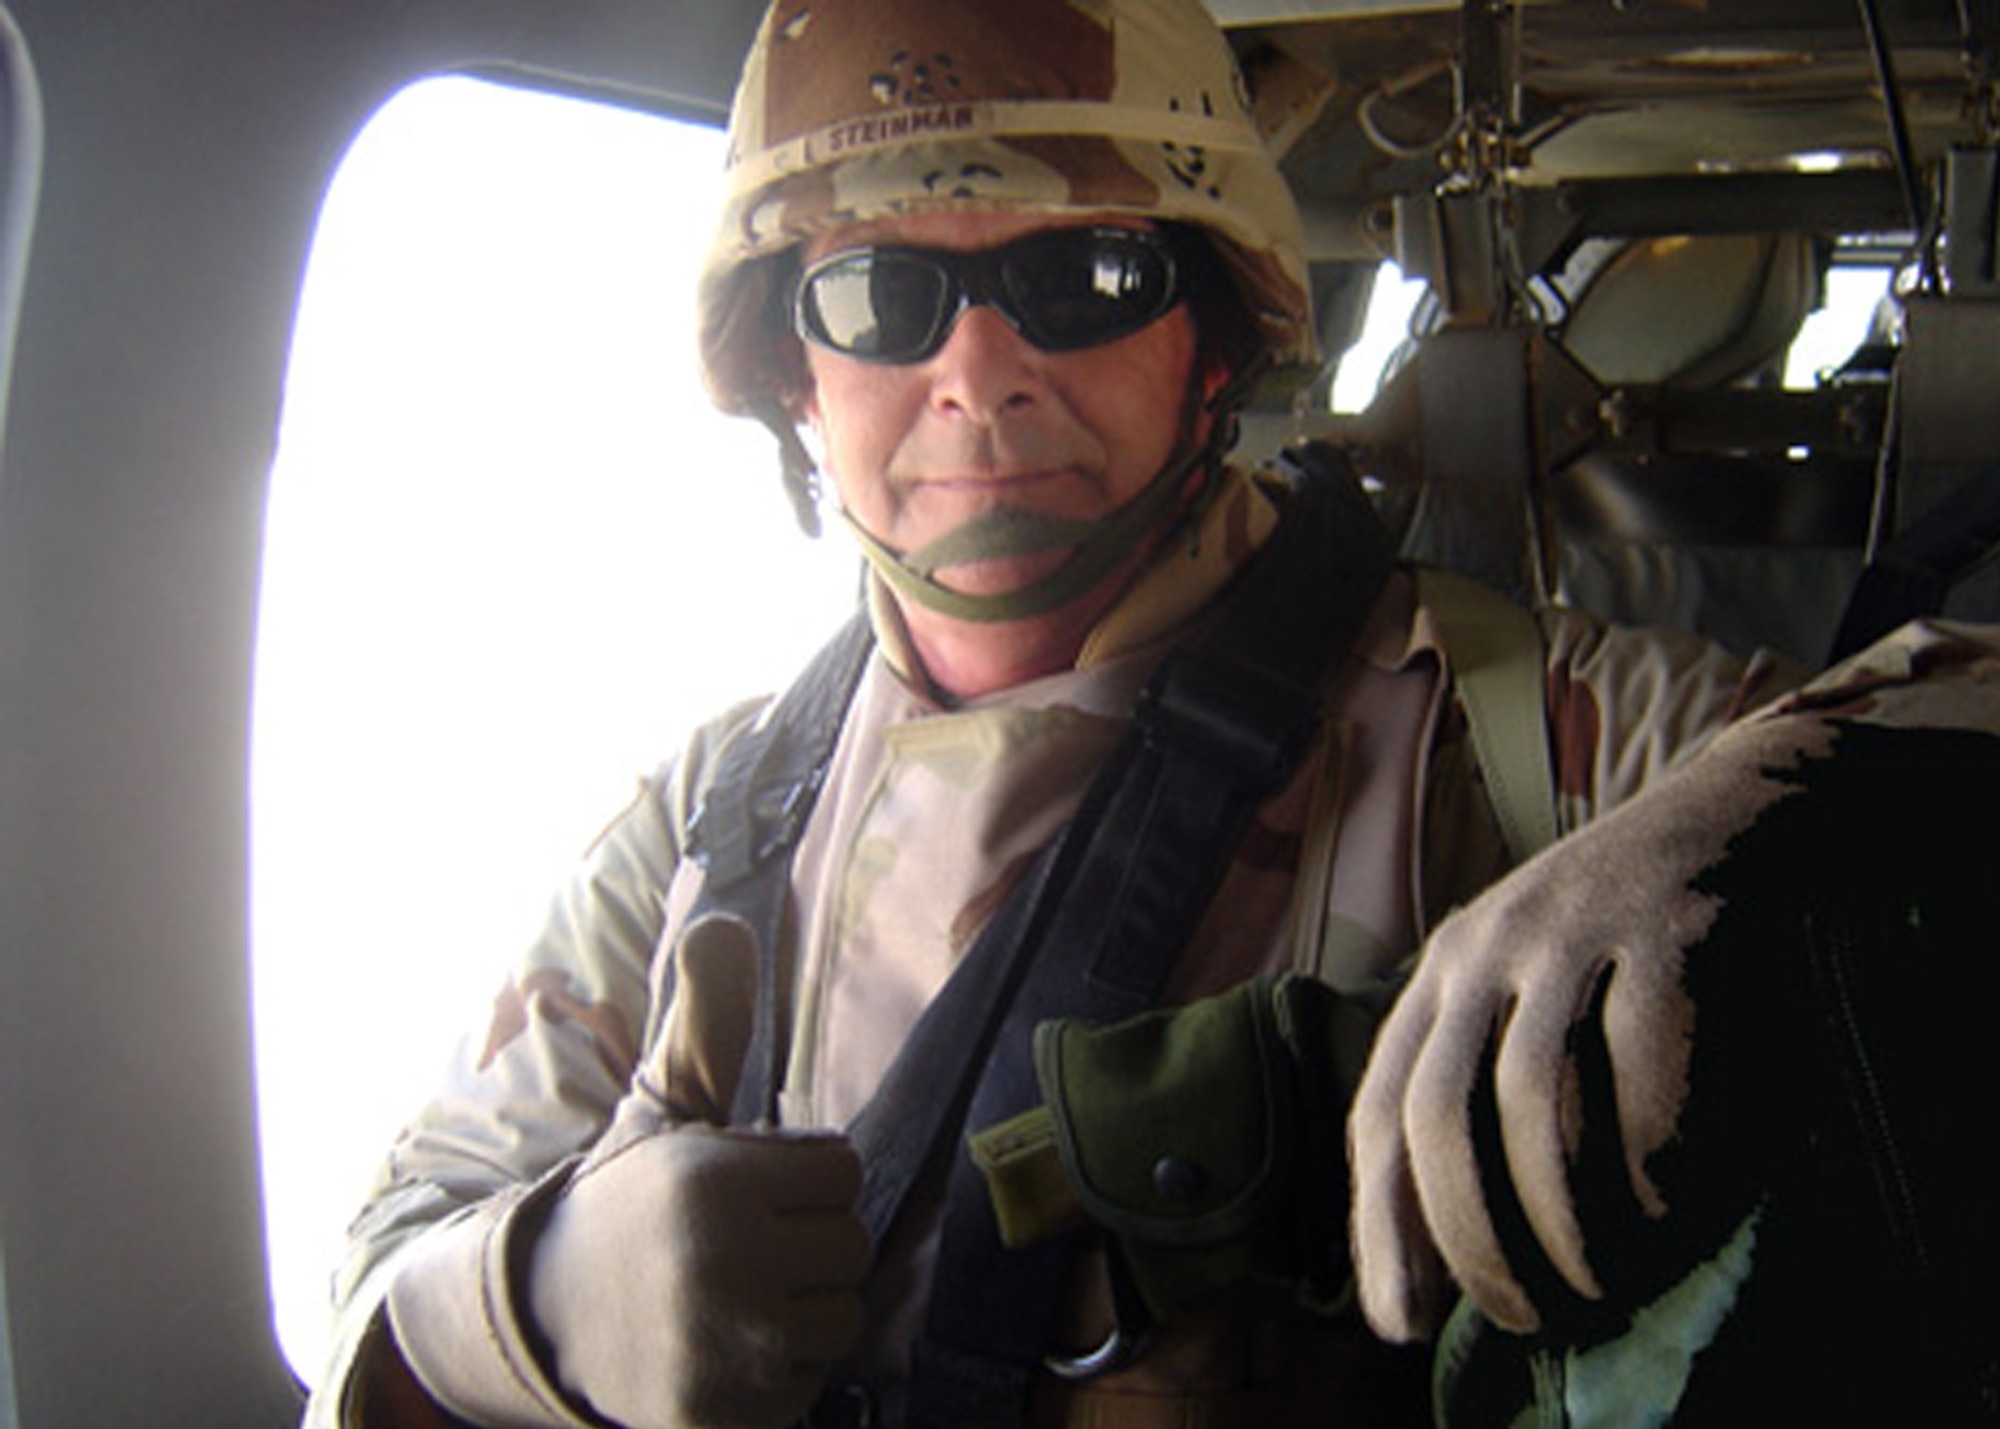 Hal Steinman, from the 38th CEG, sits on board a U.S. Army UH-60 helicopter during an Air Force communications assessment inspection to identify shorfalls and vulnerabilities for AFCENT in 2005. (Courtesy photo) 